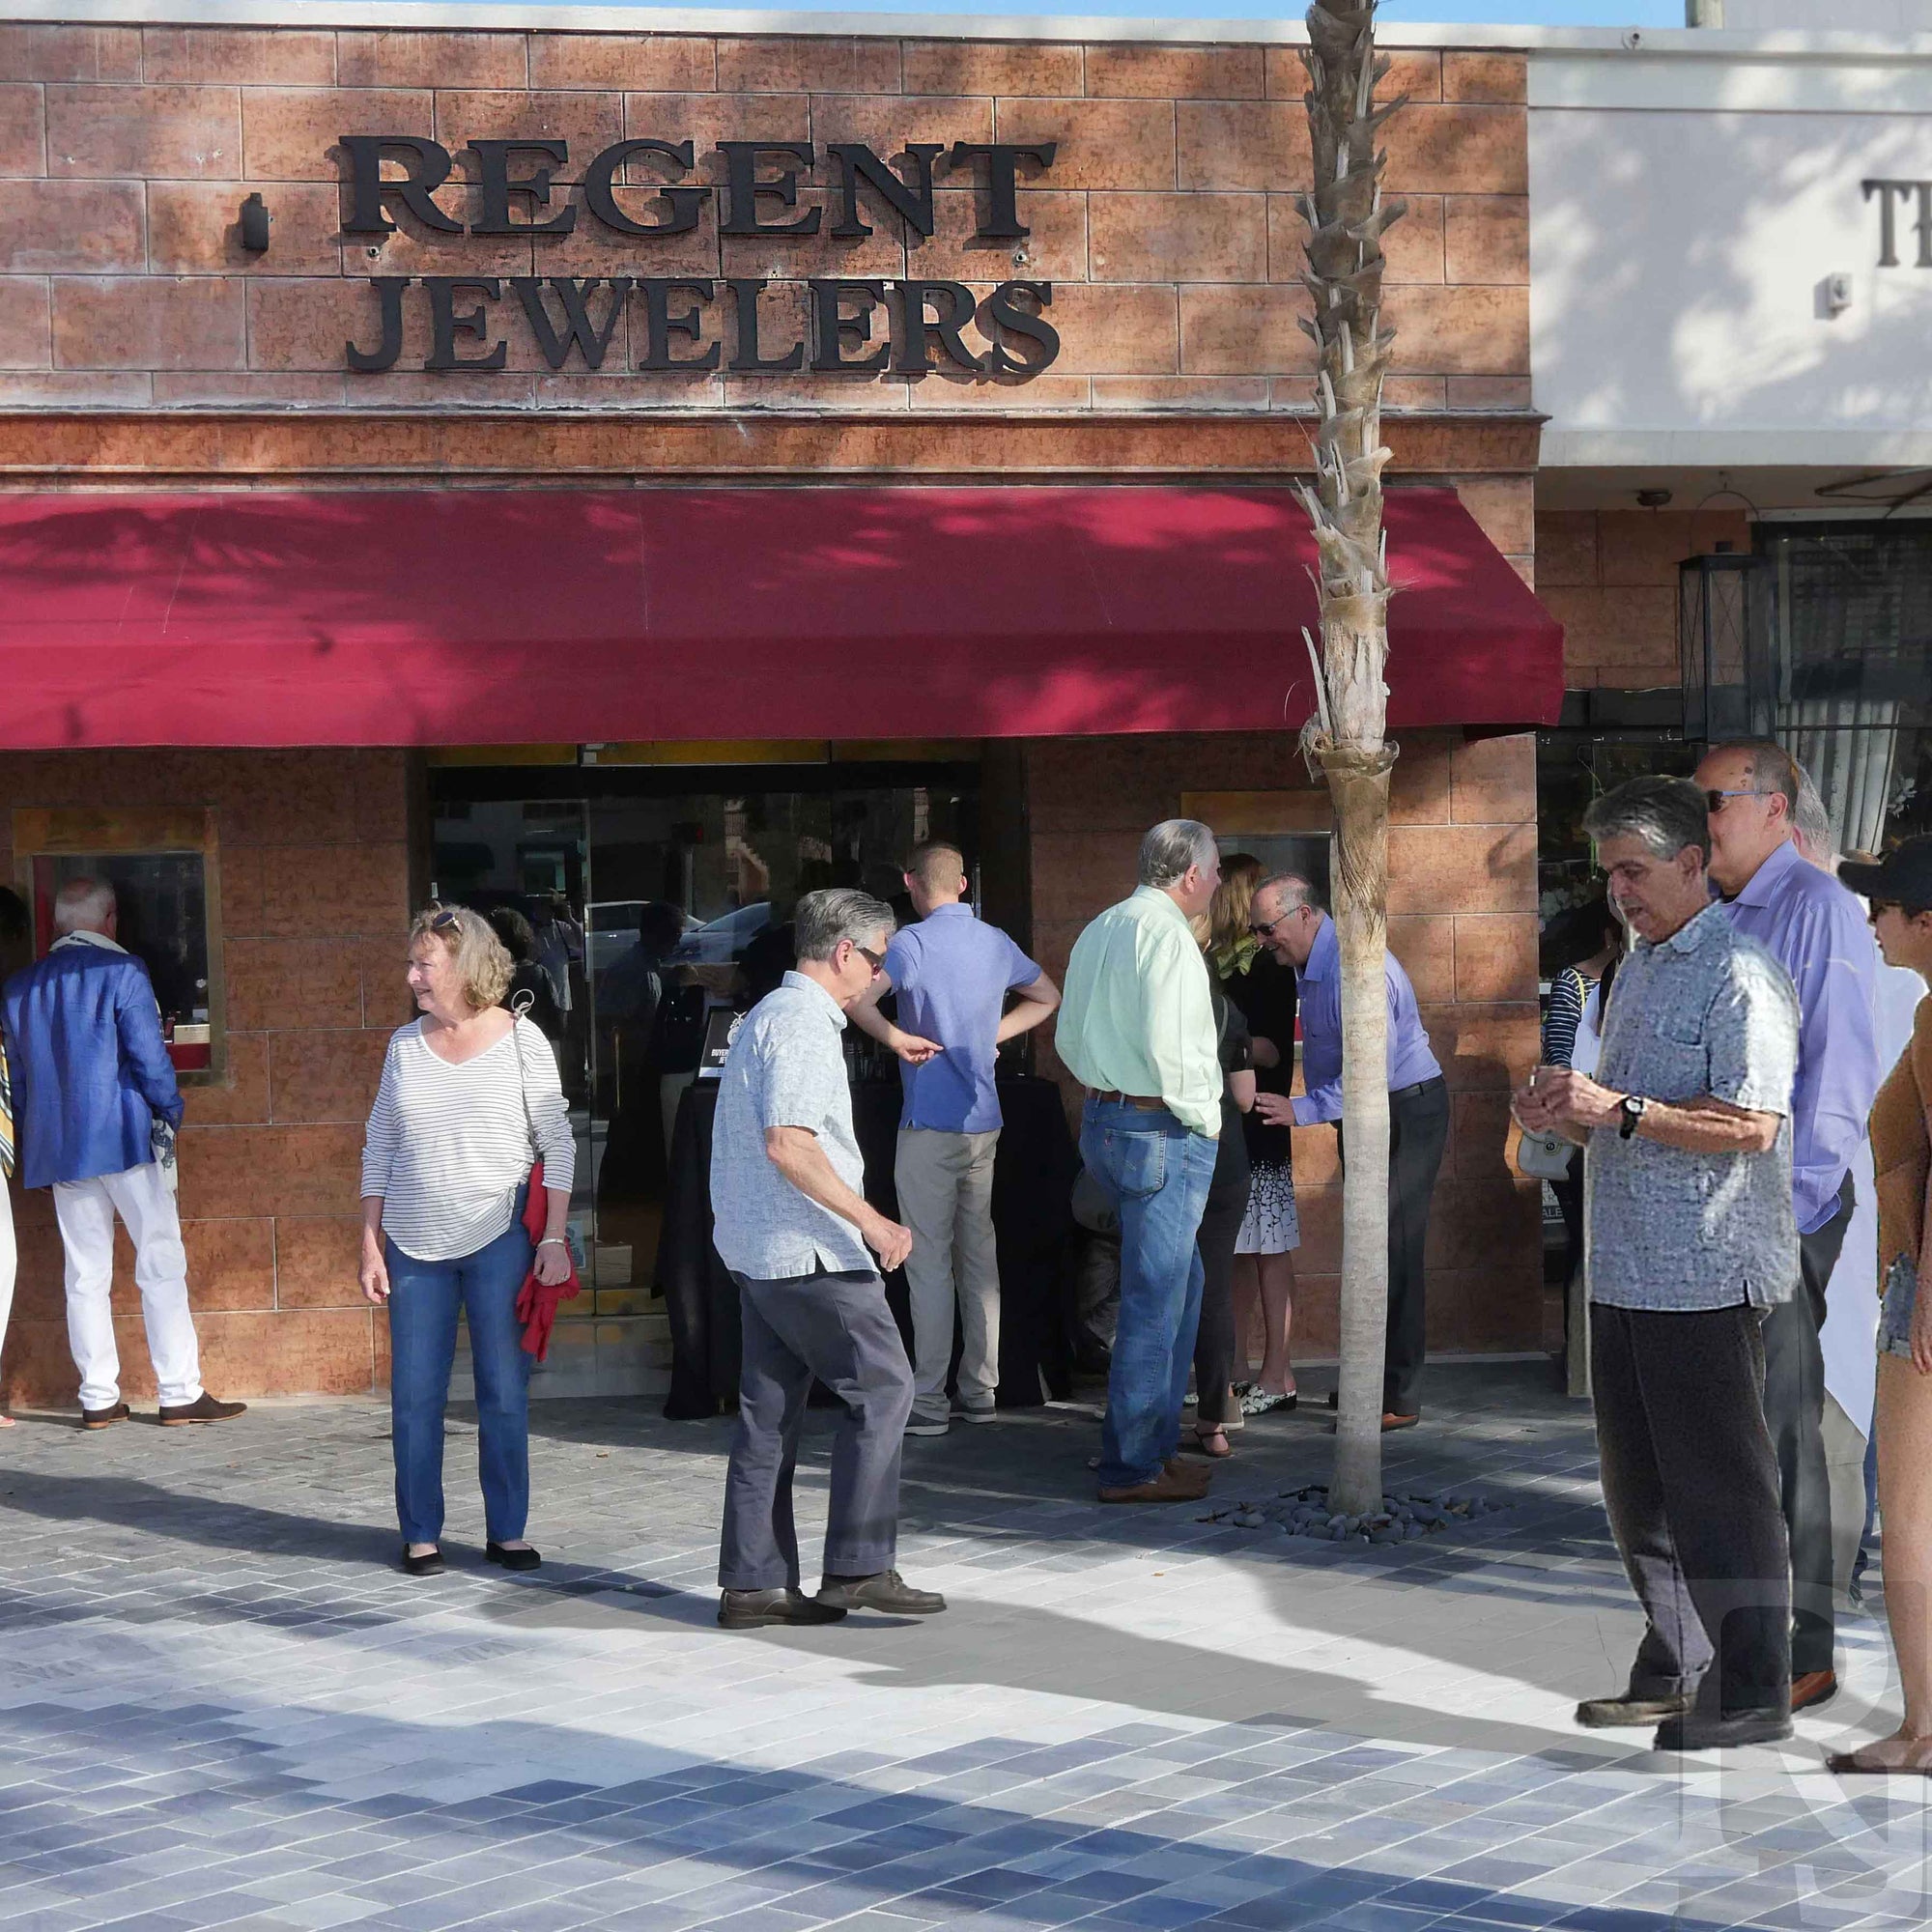 Selecting a Top Jewelry Store in Miami